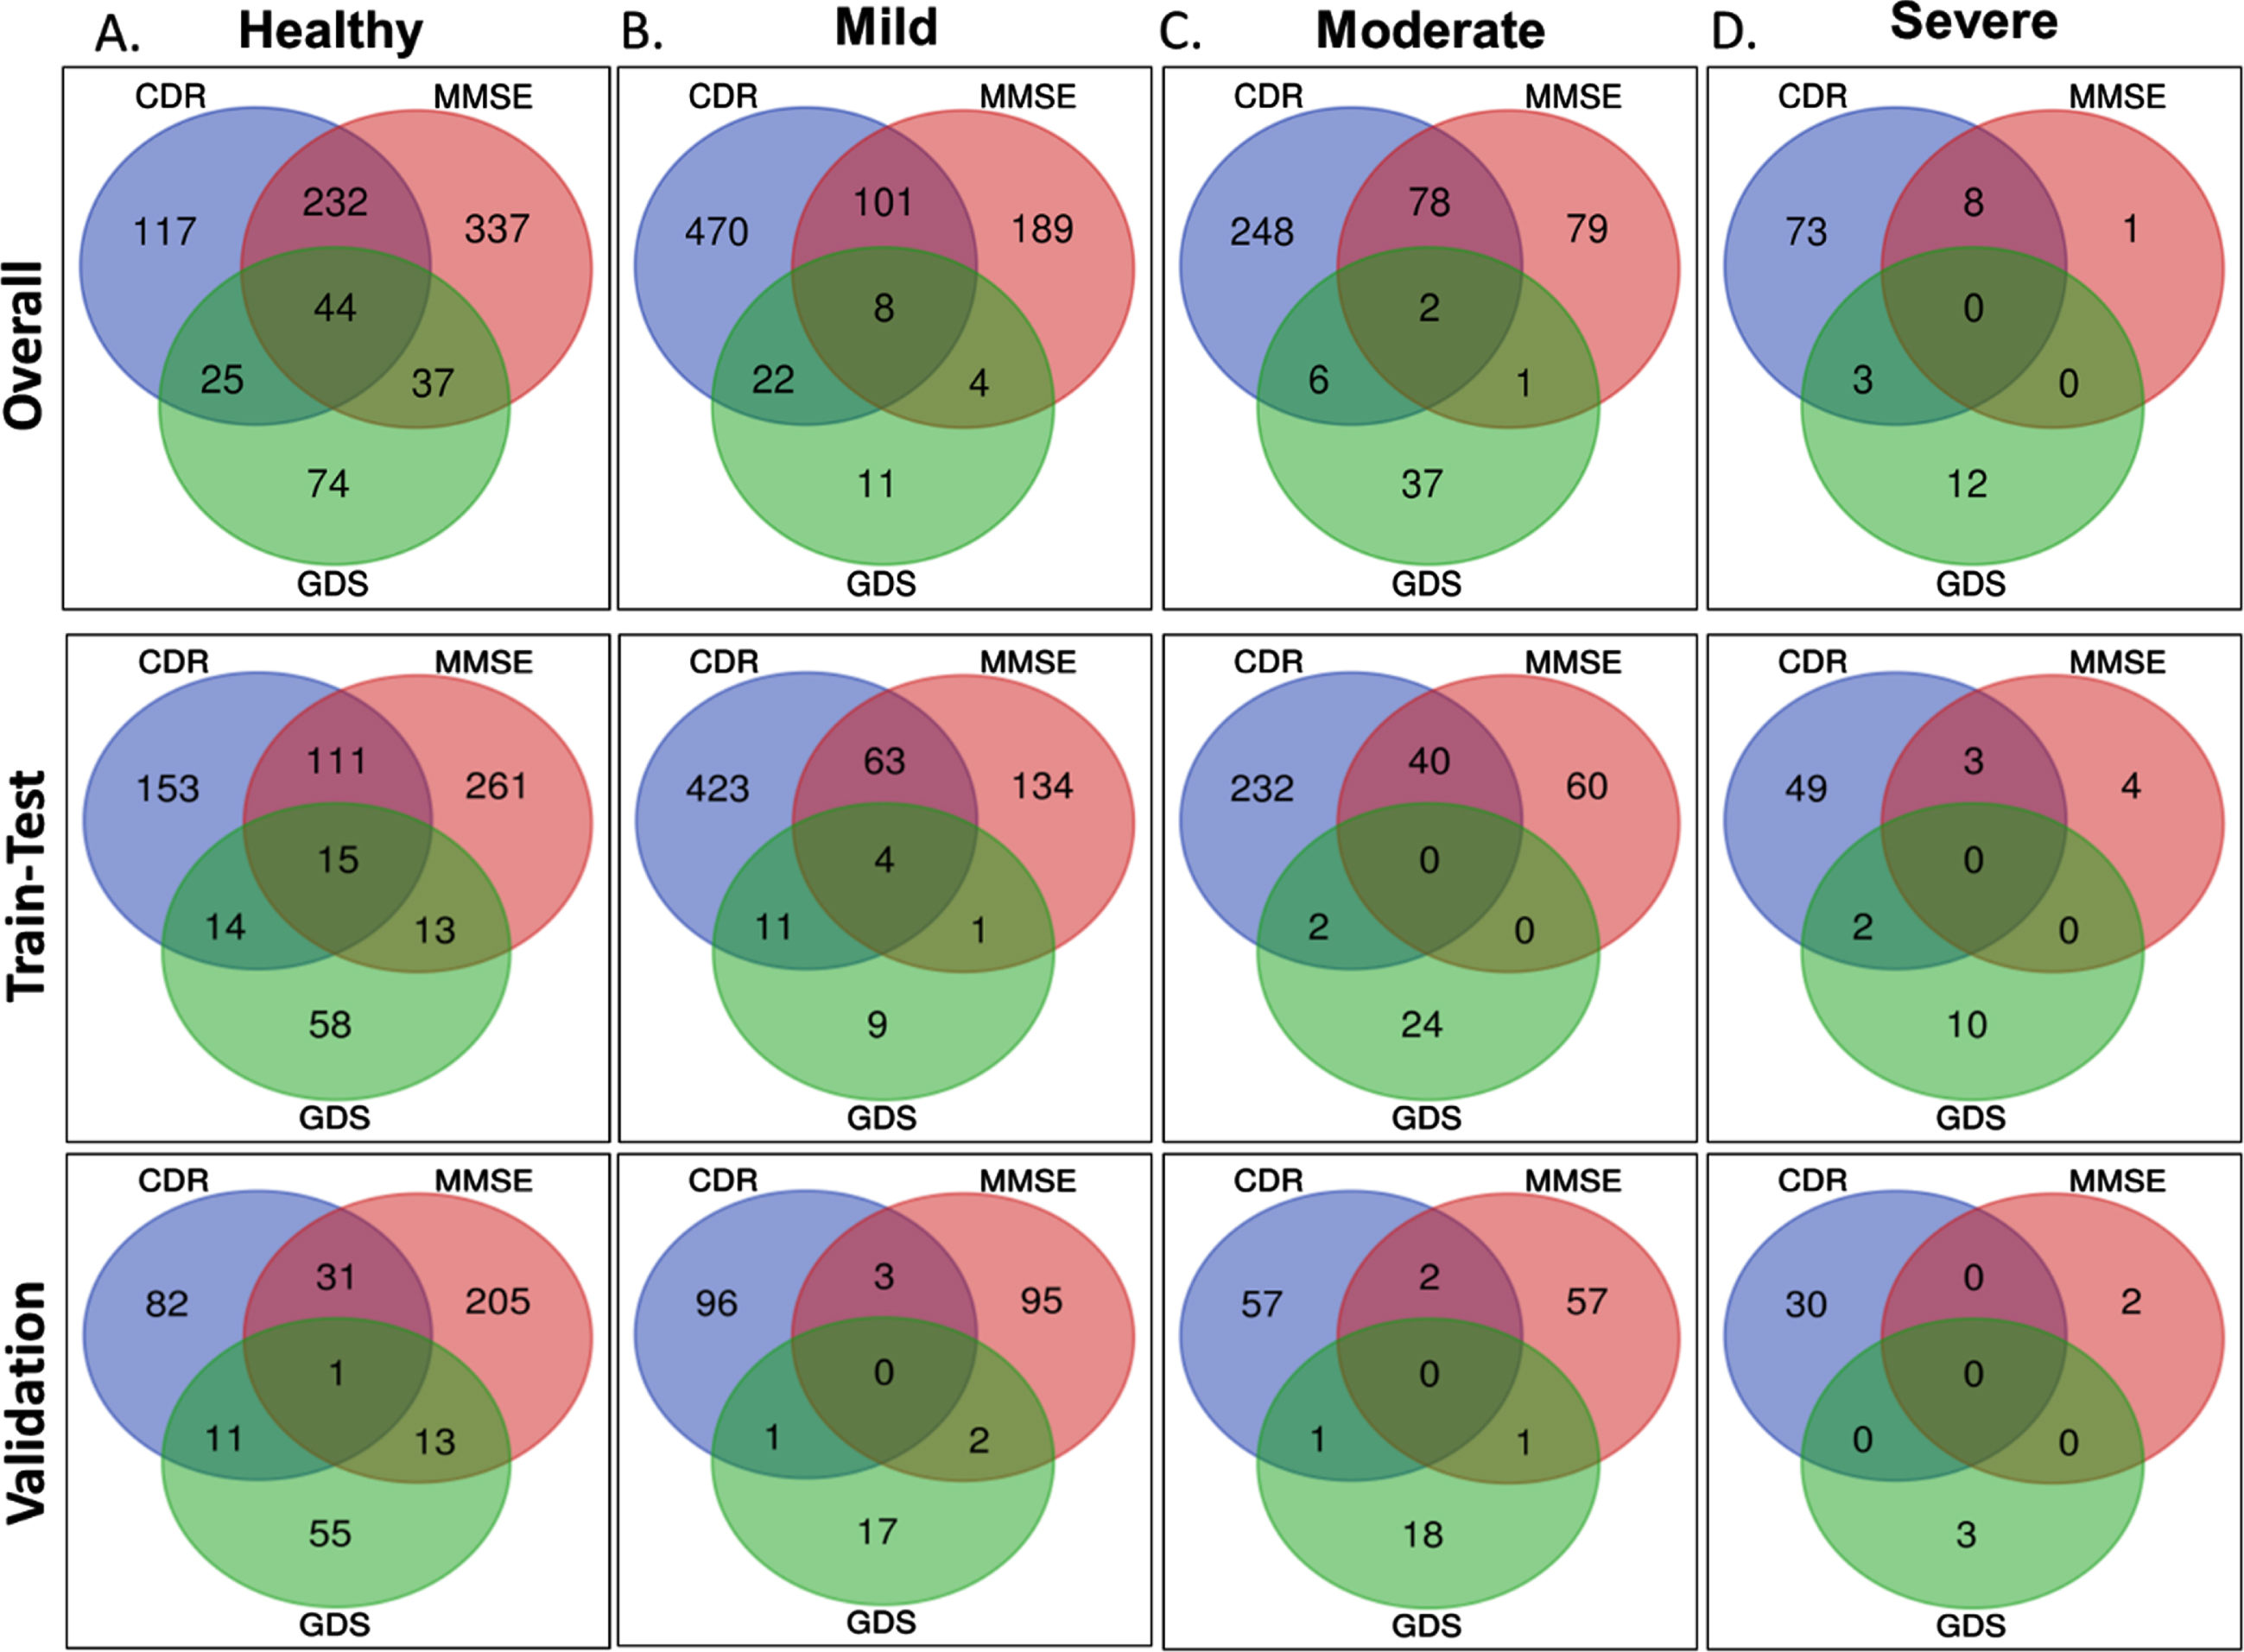 Comparison of the datasets. Panel A, B, C, and D provide the overlap and intersection of samples categorized CDR, MMSE, and GDS scoring schemes into healthy, mild, moderate, and severe categories, respectively. Upper, middle, and lower panels present the samples for overall, training-testing, and validation datasets, respectively.